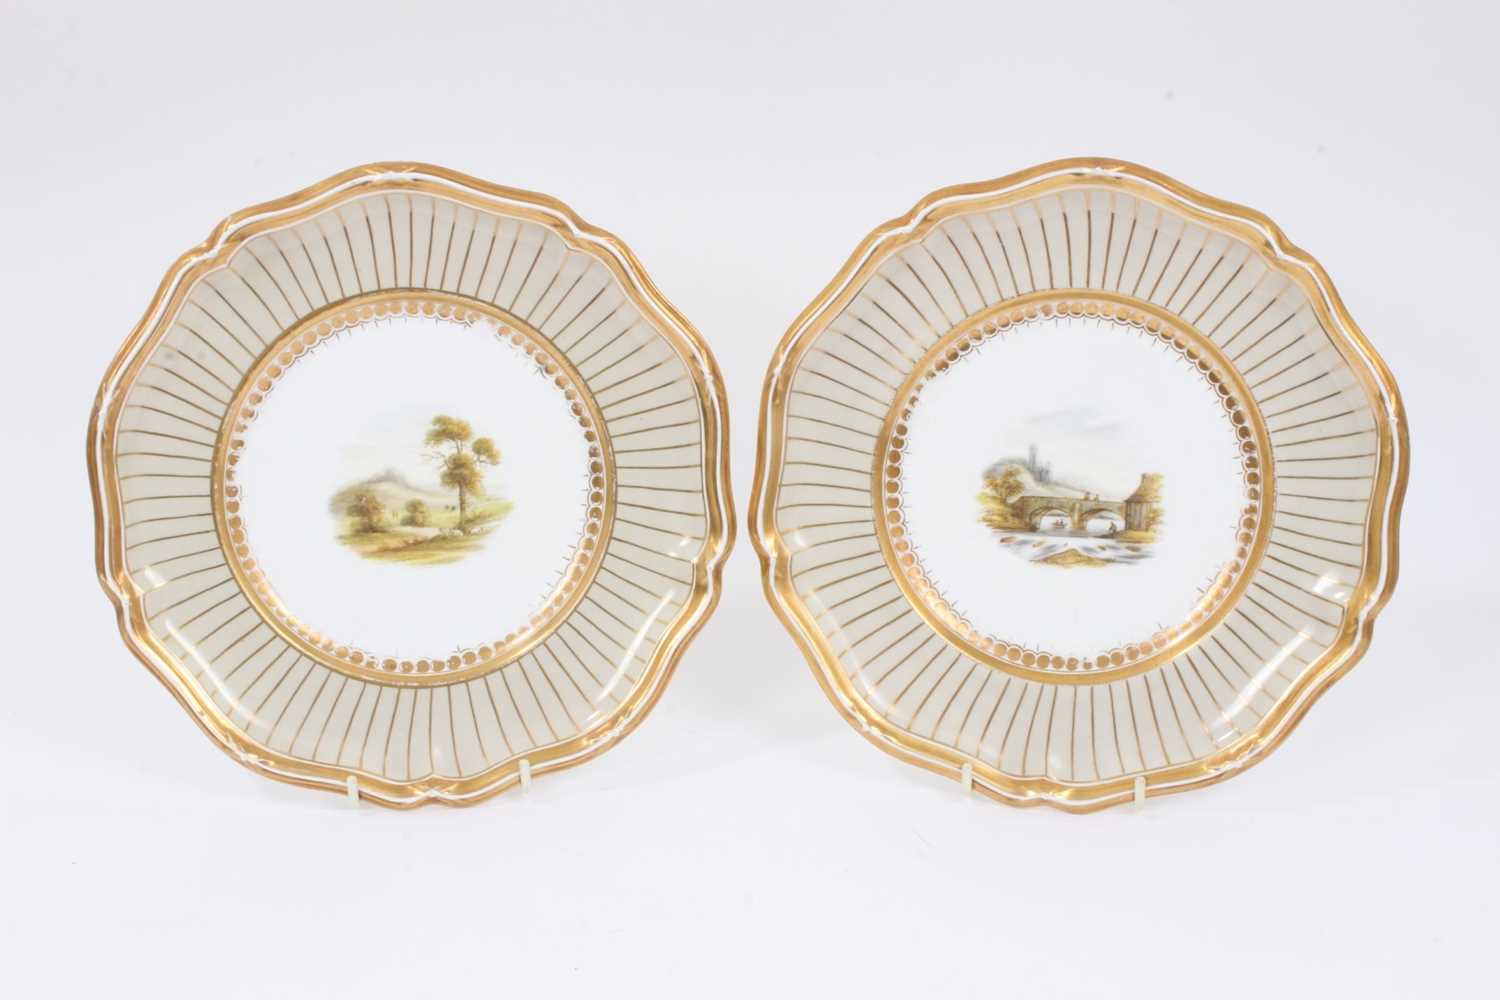 Lot 298 - A pair of Davenport plates, painted with landscapes, circa 1840-45